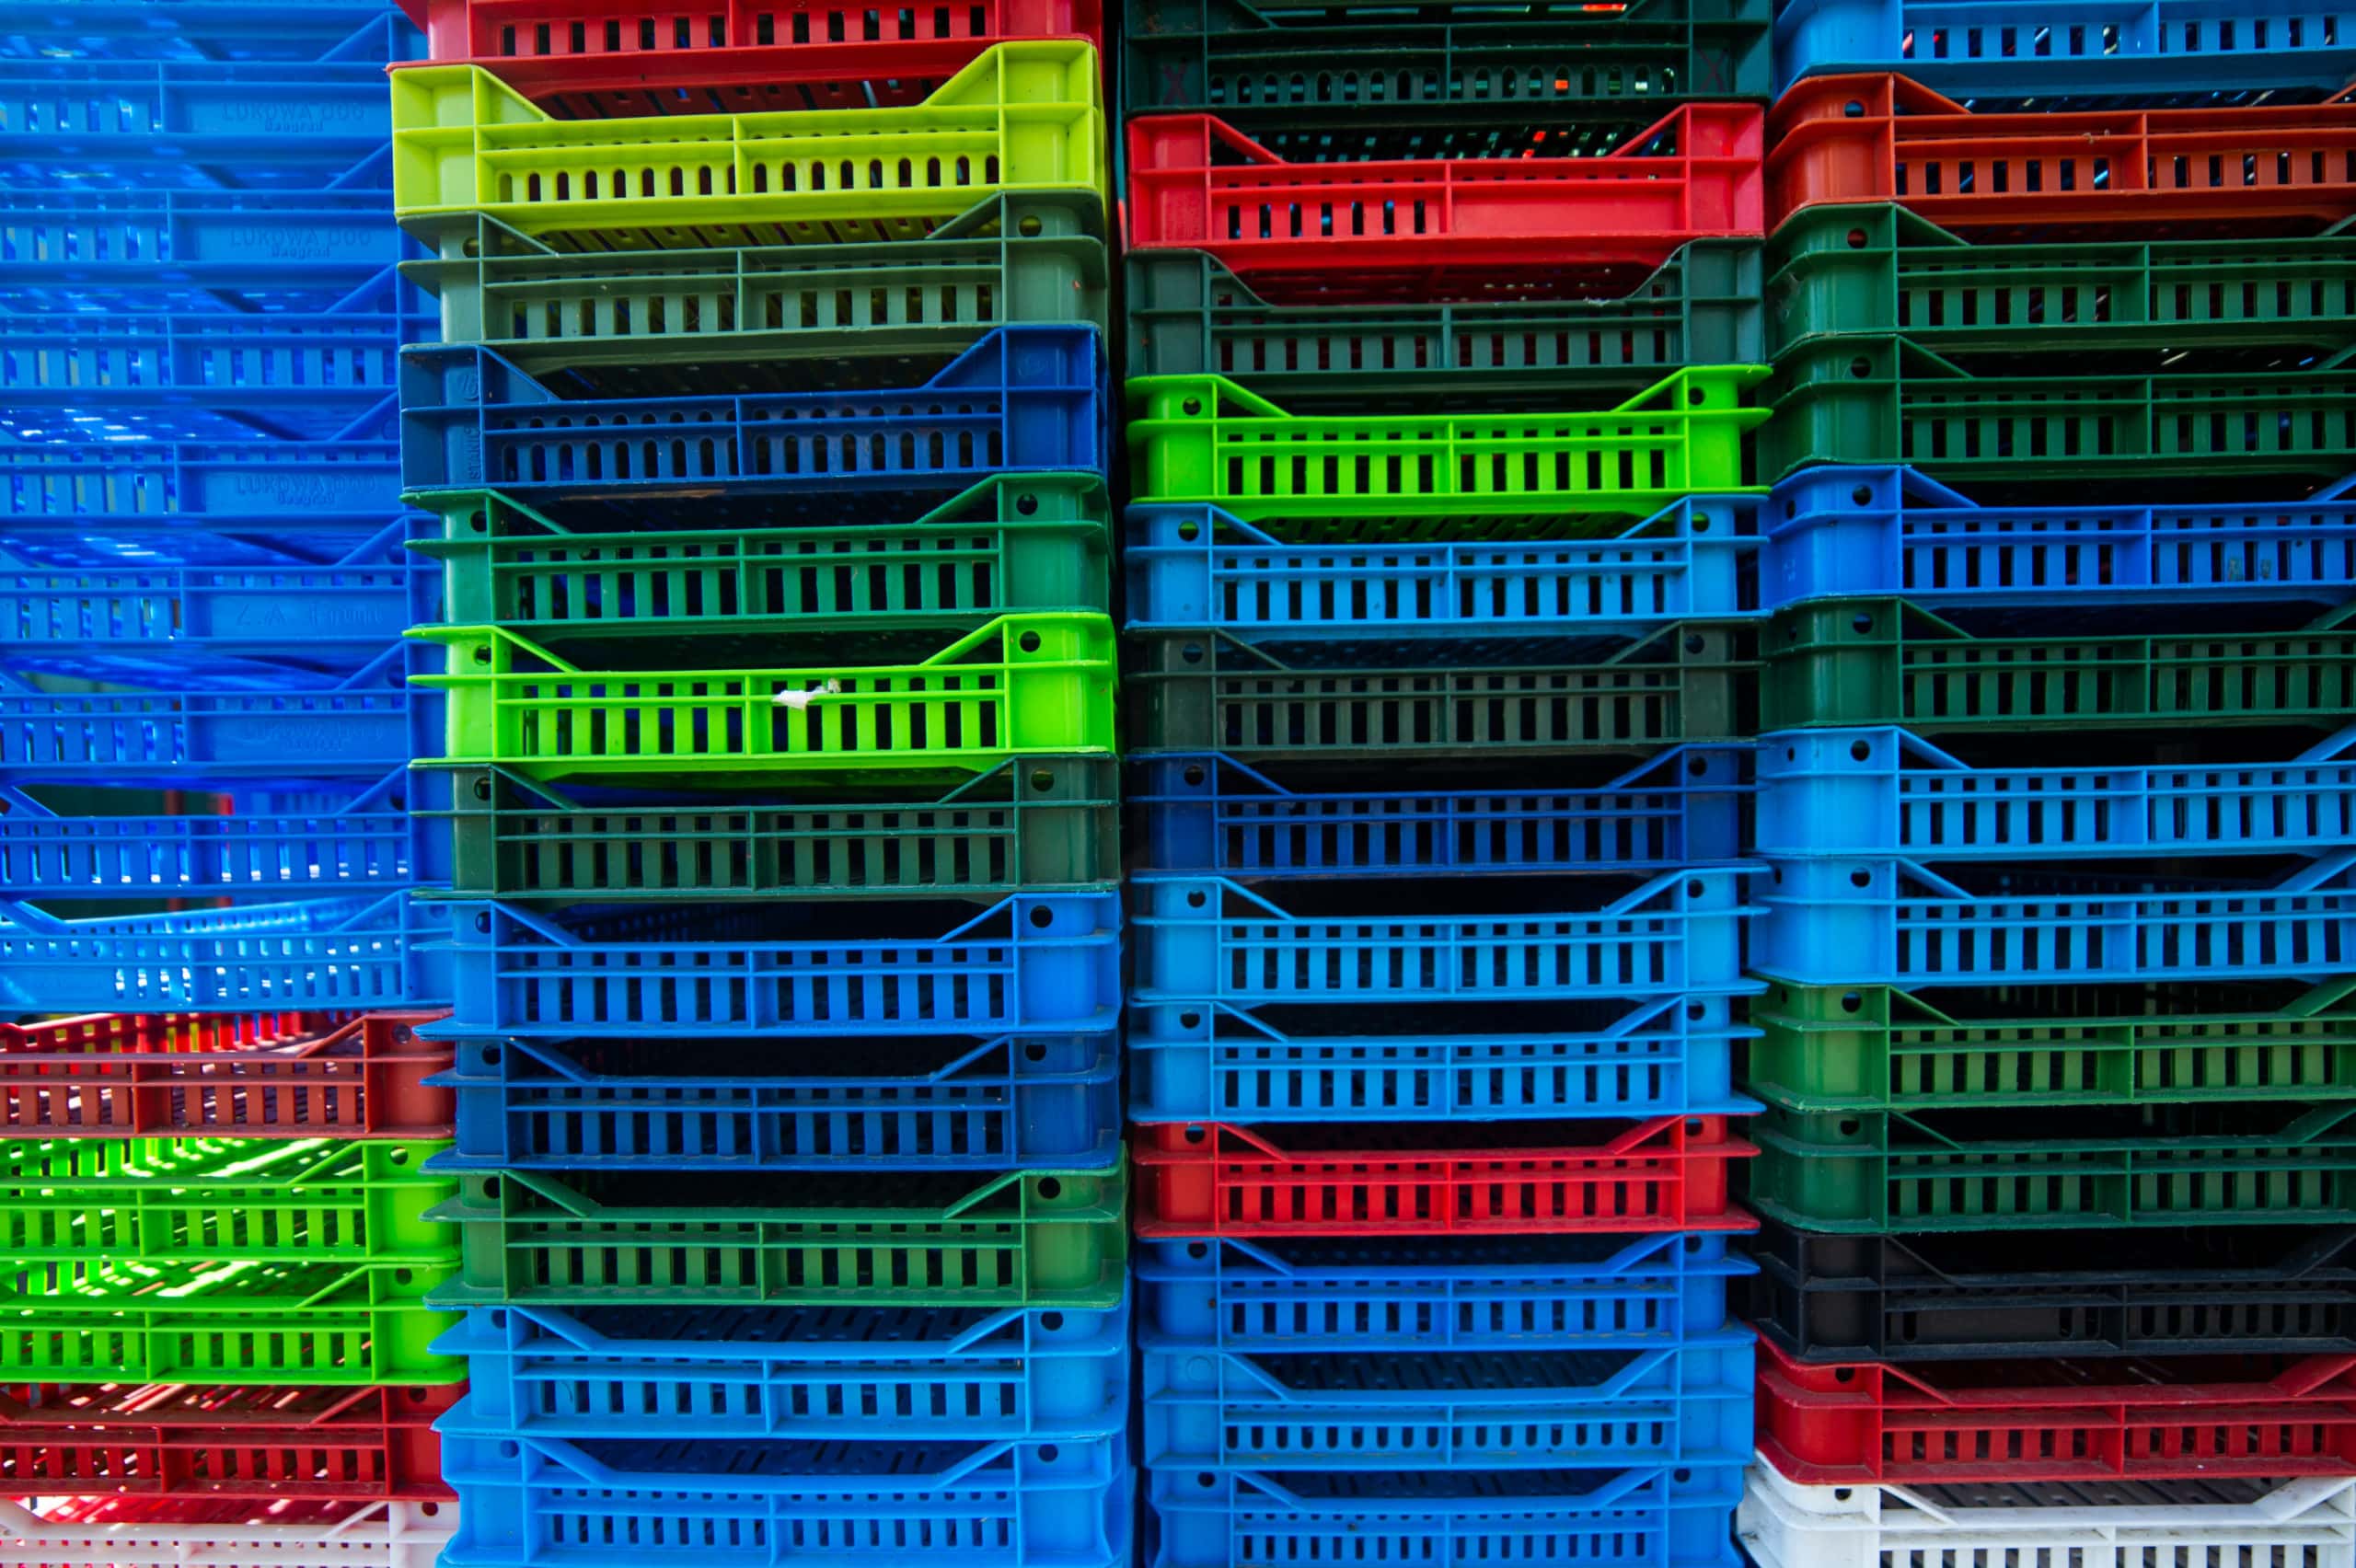 Crates Stacked at a Distribution Center to be cleaned with pallet washing system.